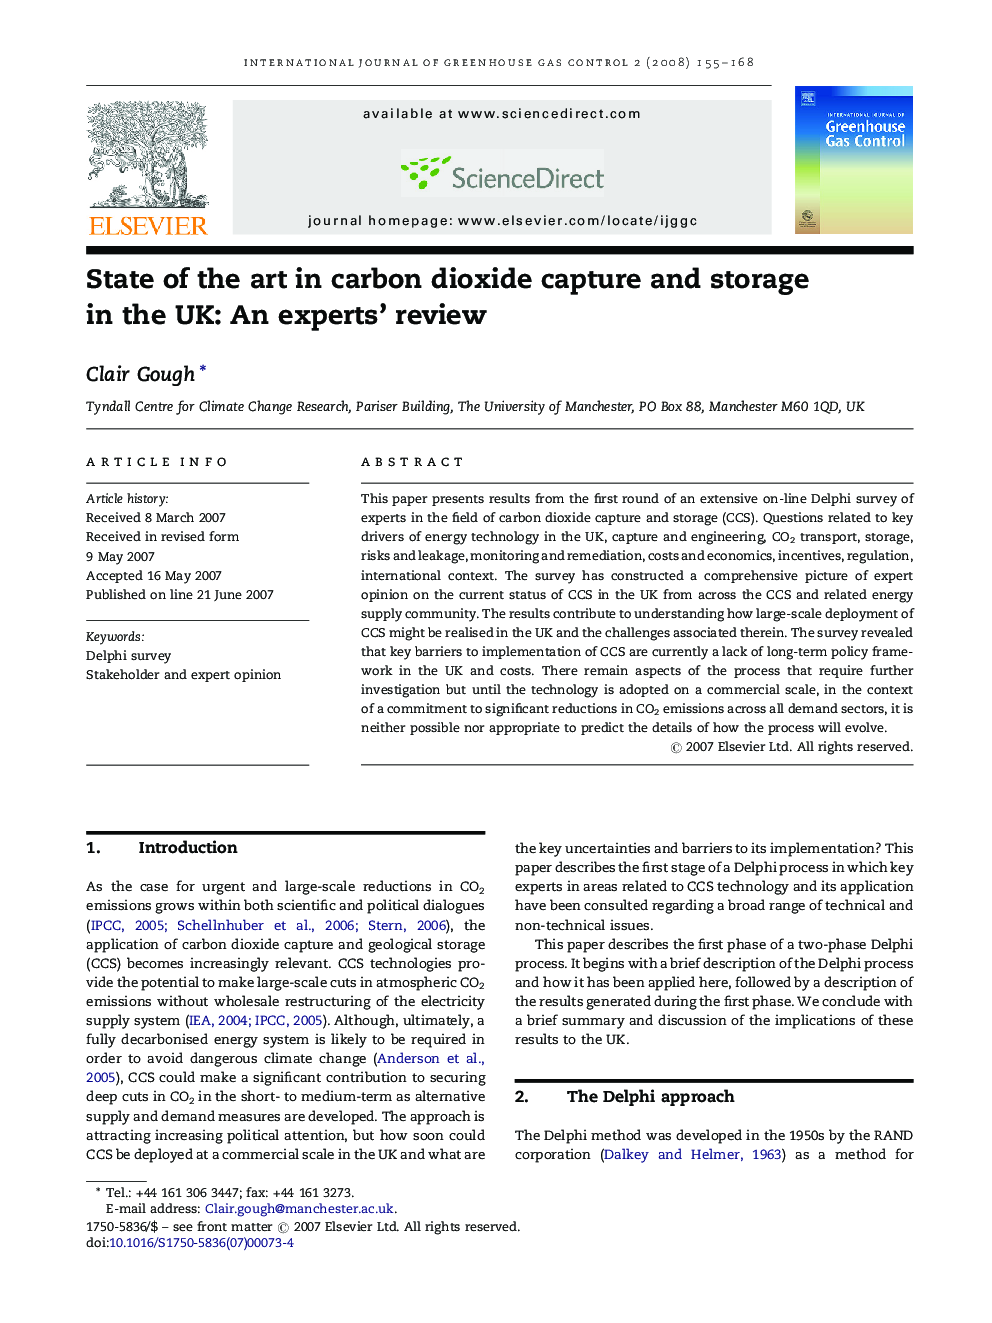 State of the art in carbon dioxide capture and storage in the UK: An experts’ review